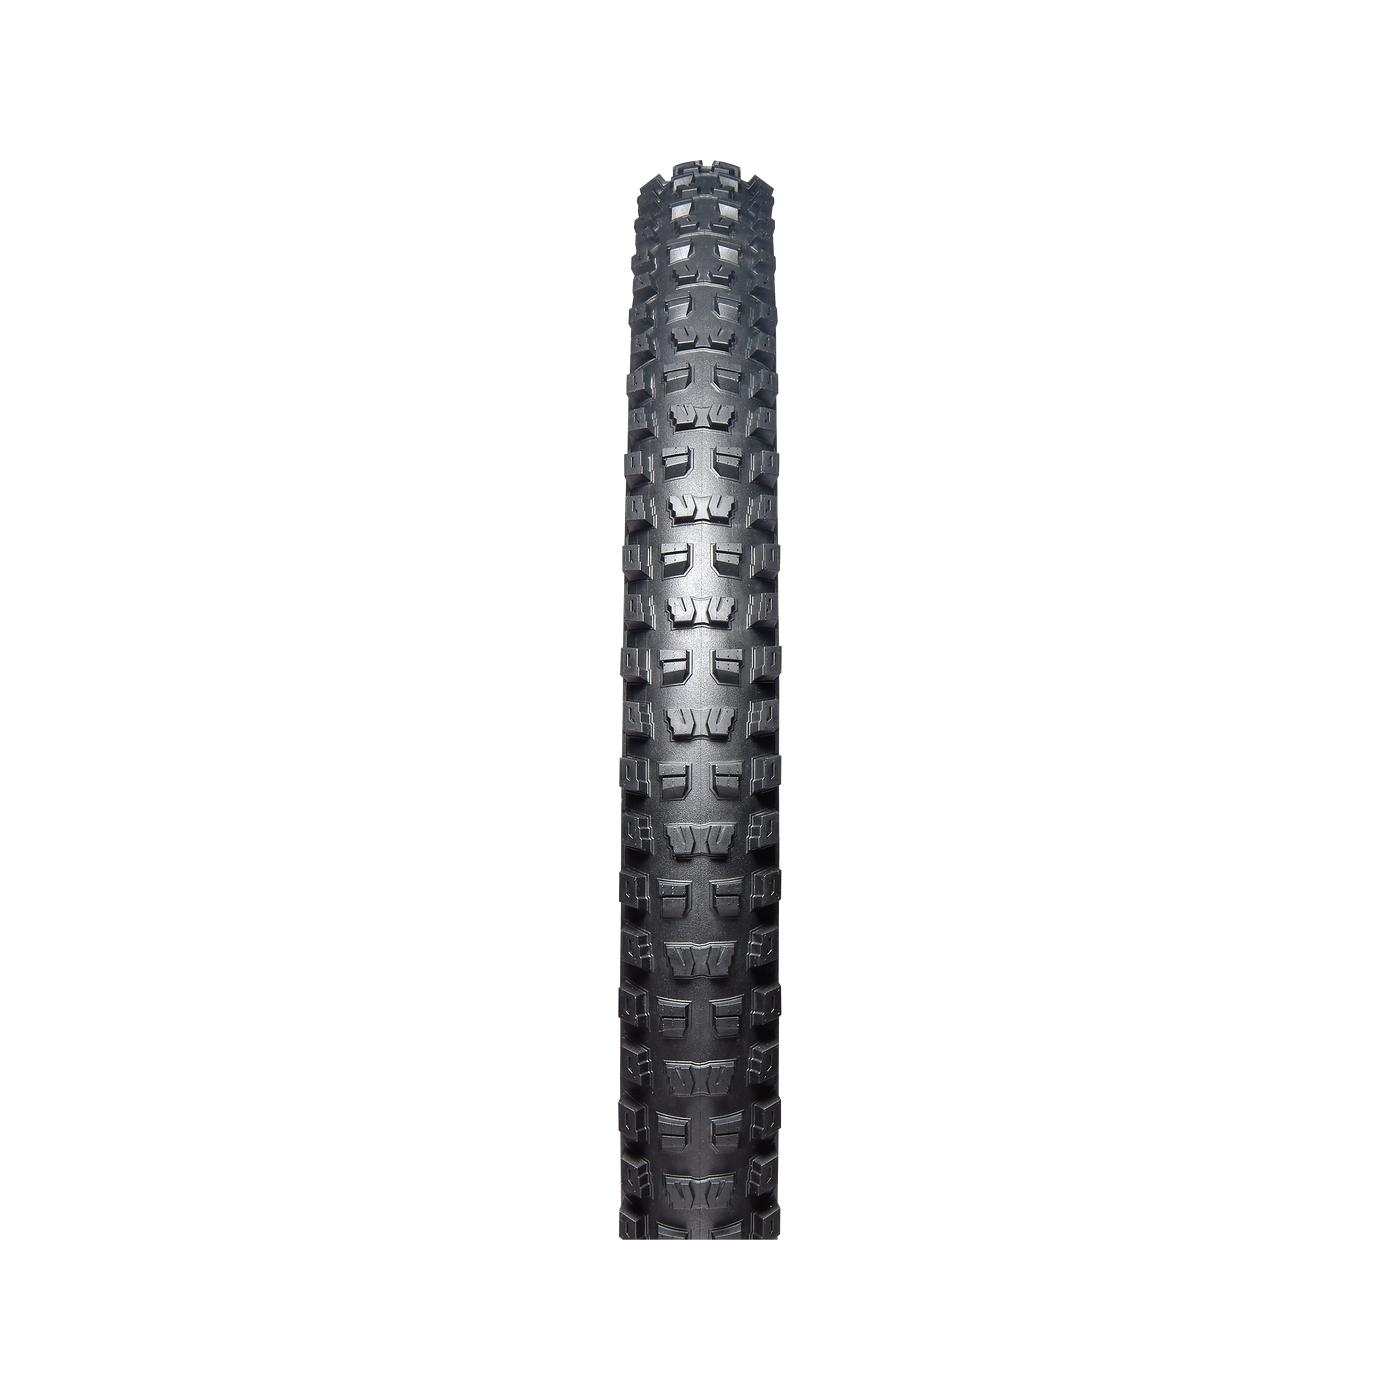 Specialized Butcher Grid 2Bliss Ready T7 29" Mountain Bike Tire - Tires - Bicycle Warehouse